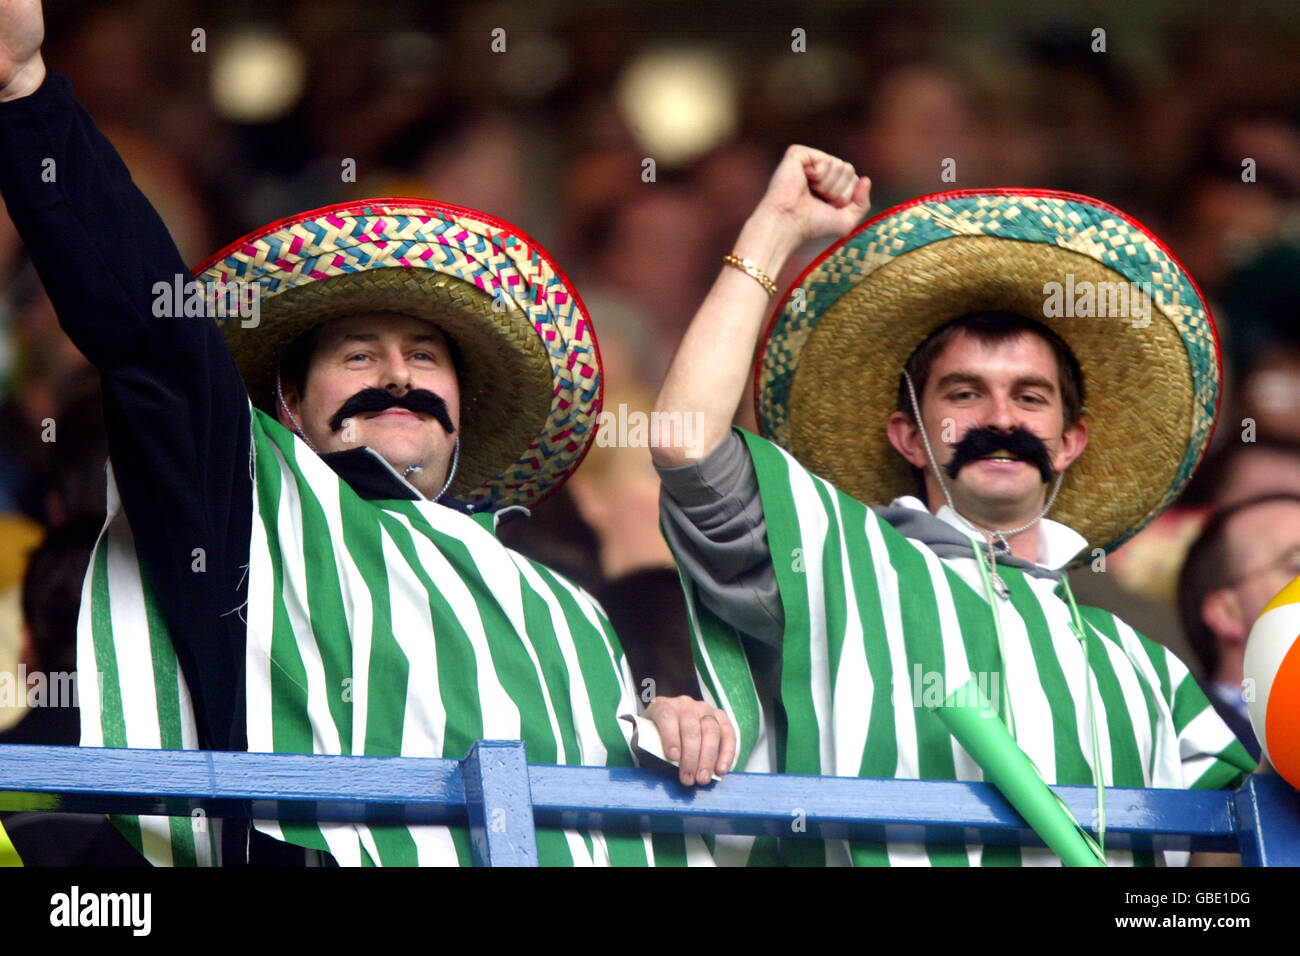 Soccer - Bank of Scotland Premier Division - Rangers v Celtic. Celtic fans dress up as Mexicans for the occasion Stock Photo